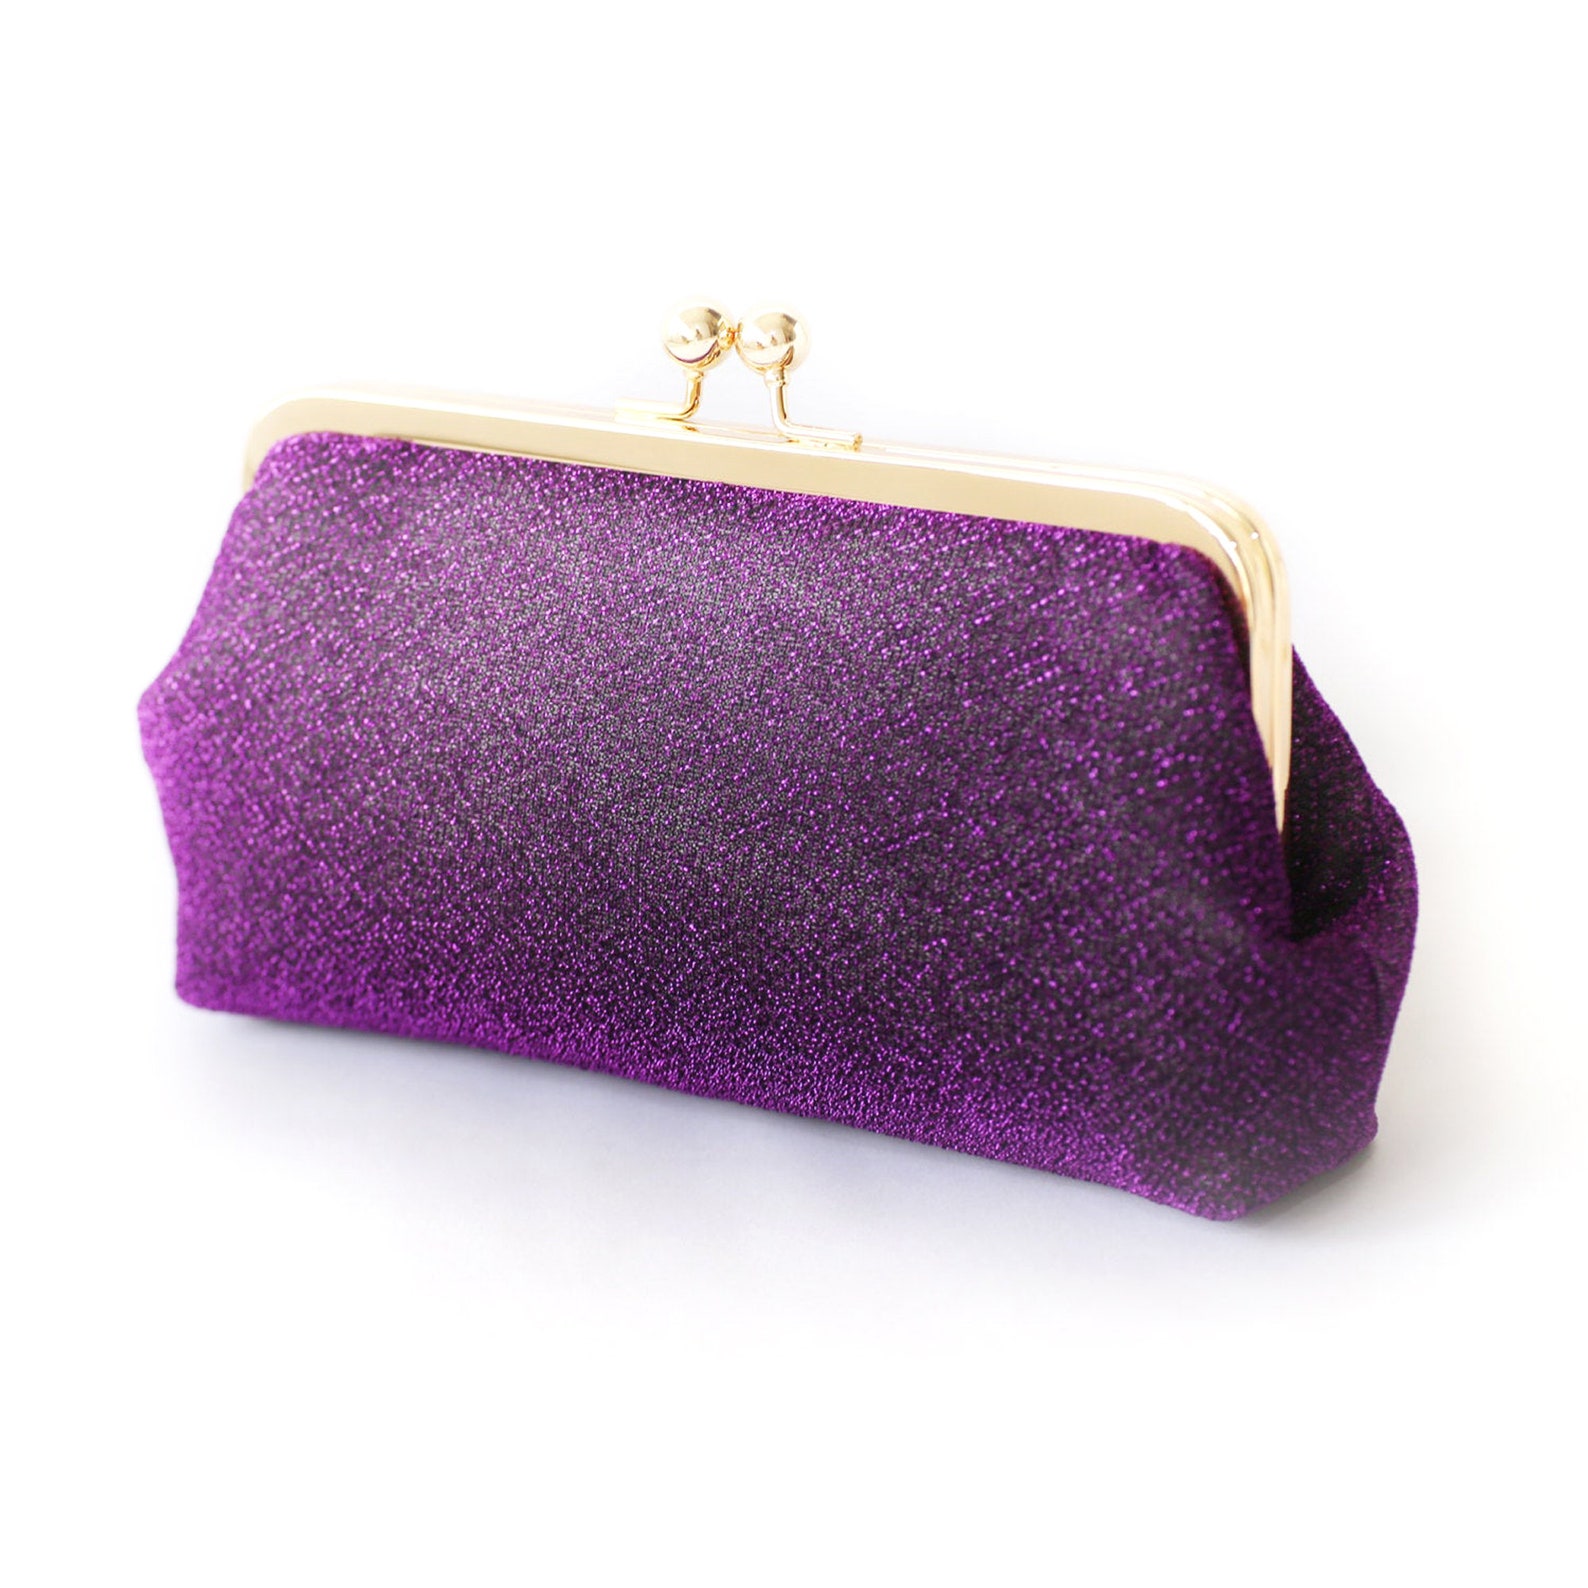 Shimmery Purple Mauve Clutch Purse for Brides Mother of the - Etsy